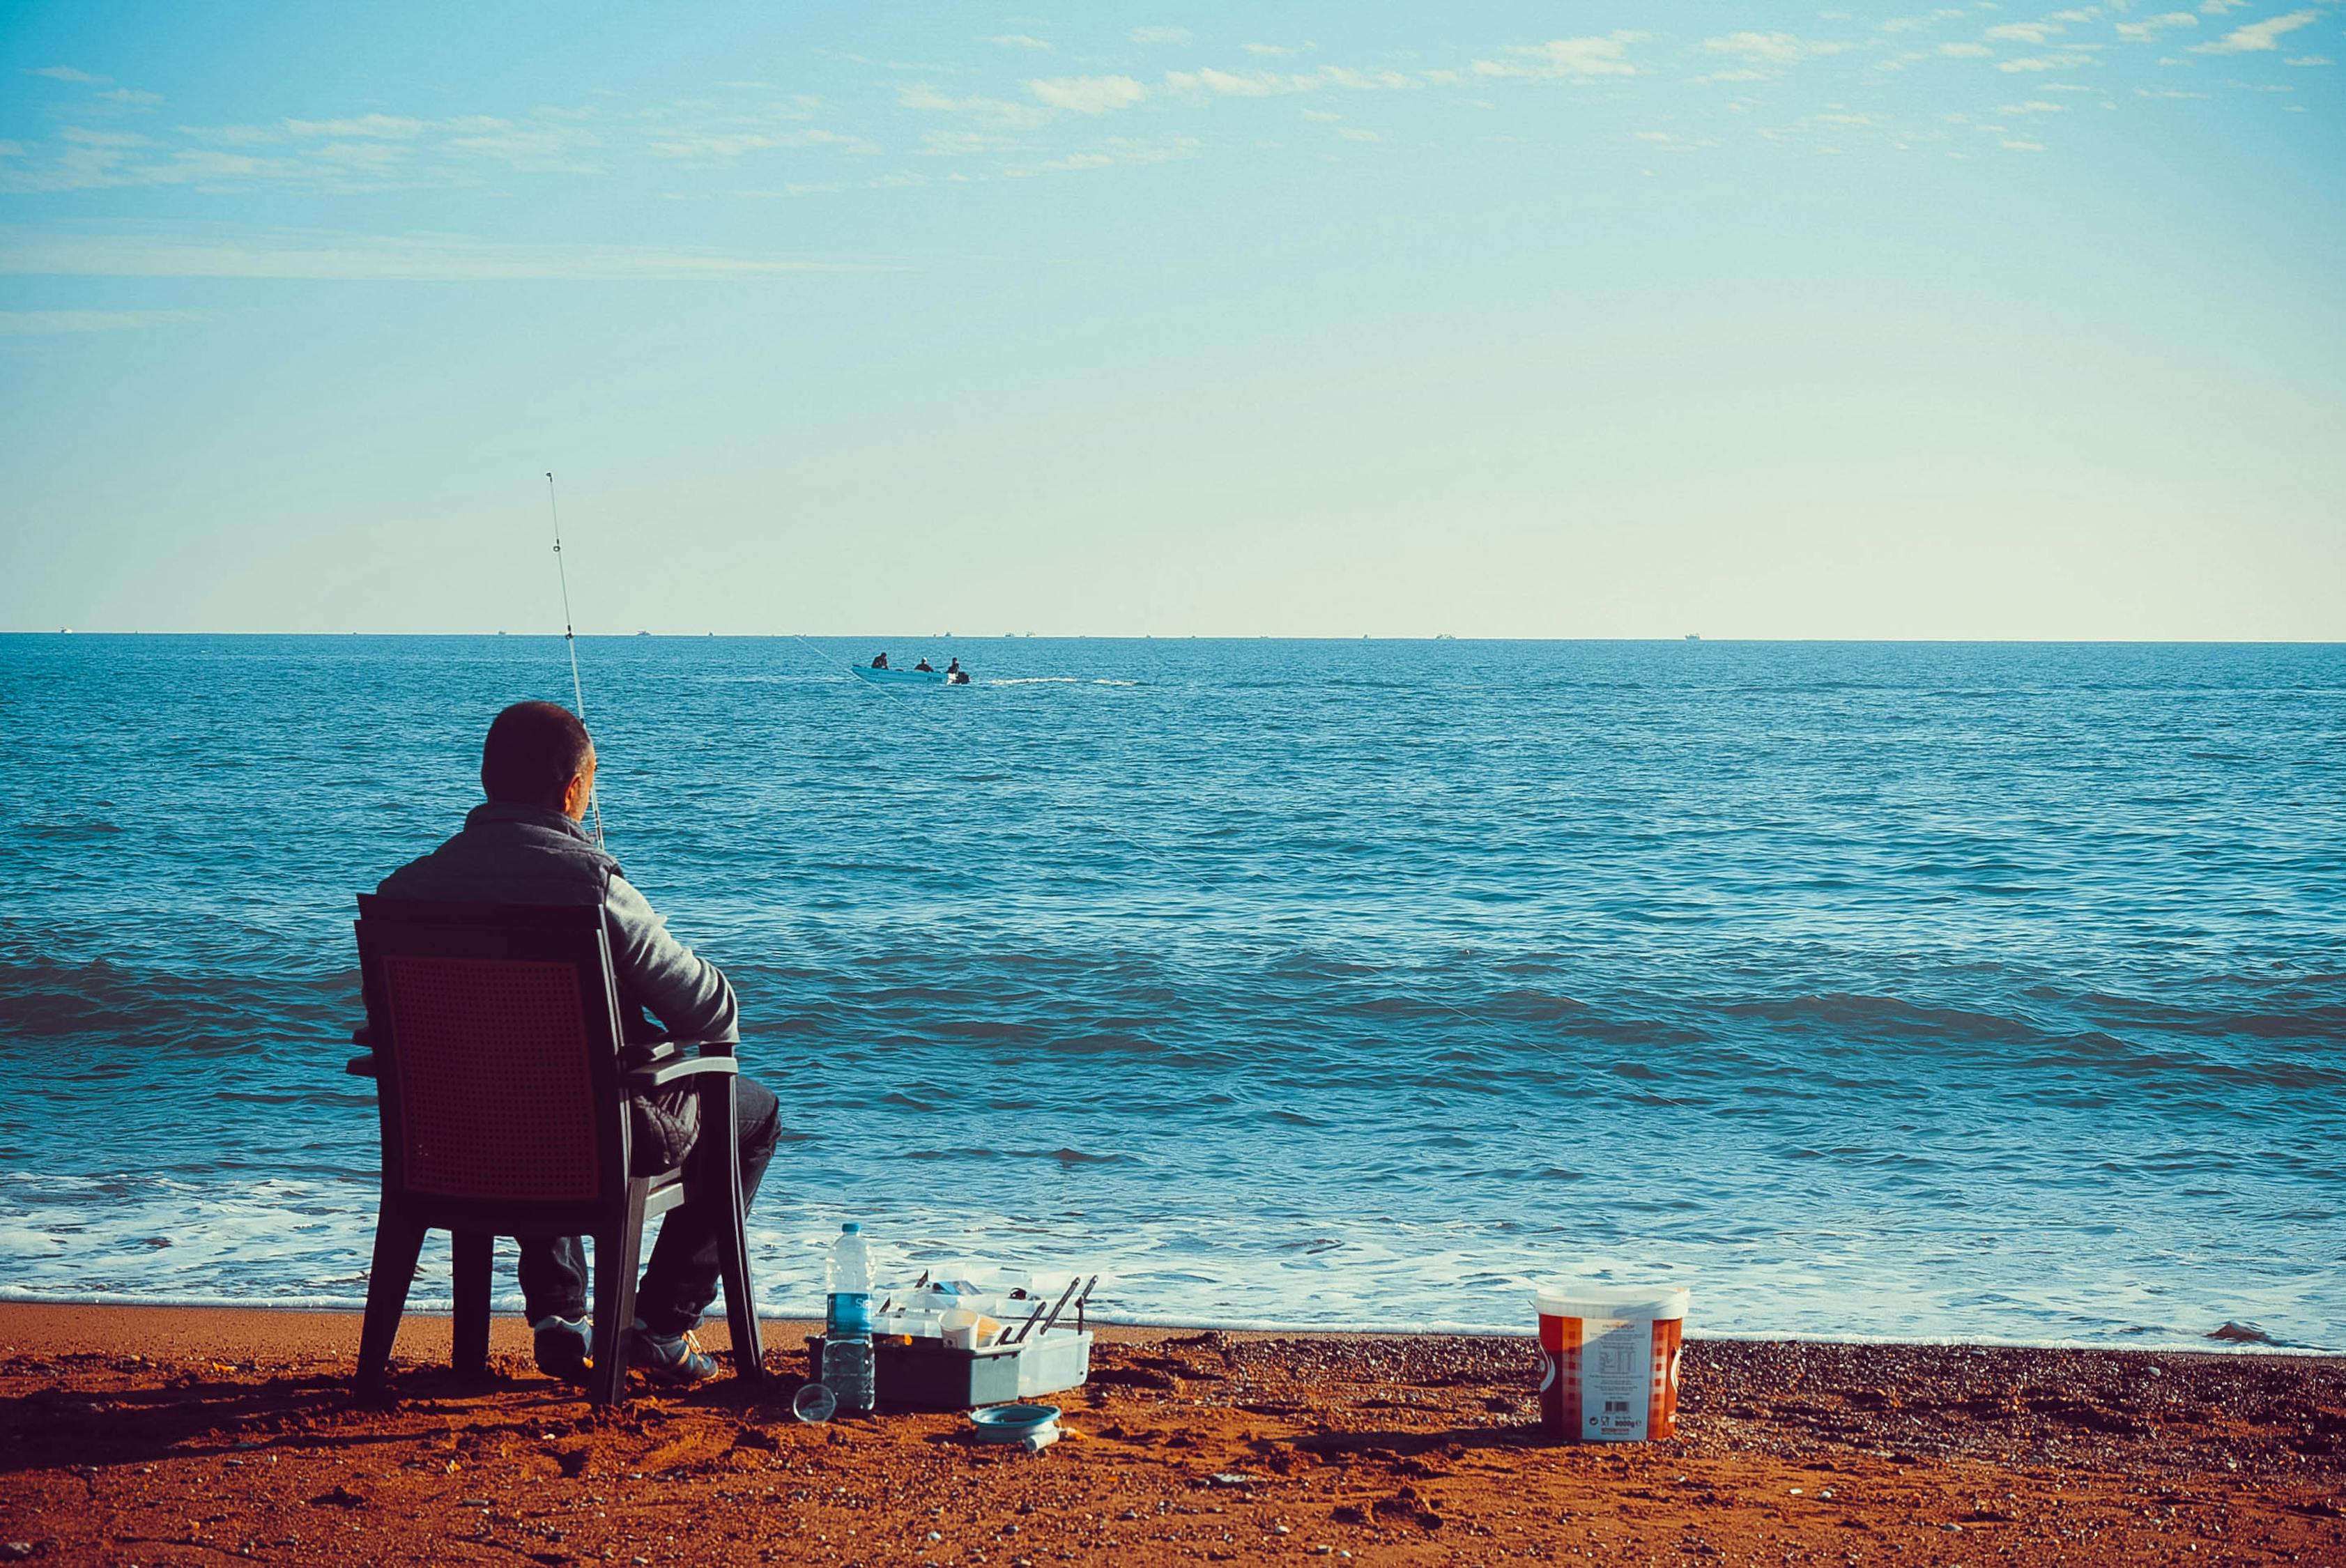 Man sitting on a chair while fishing at the sea shore